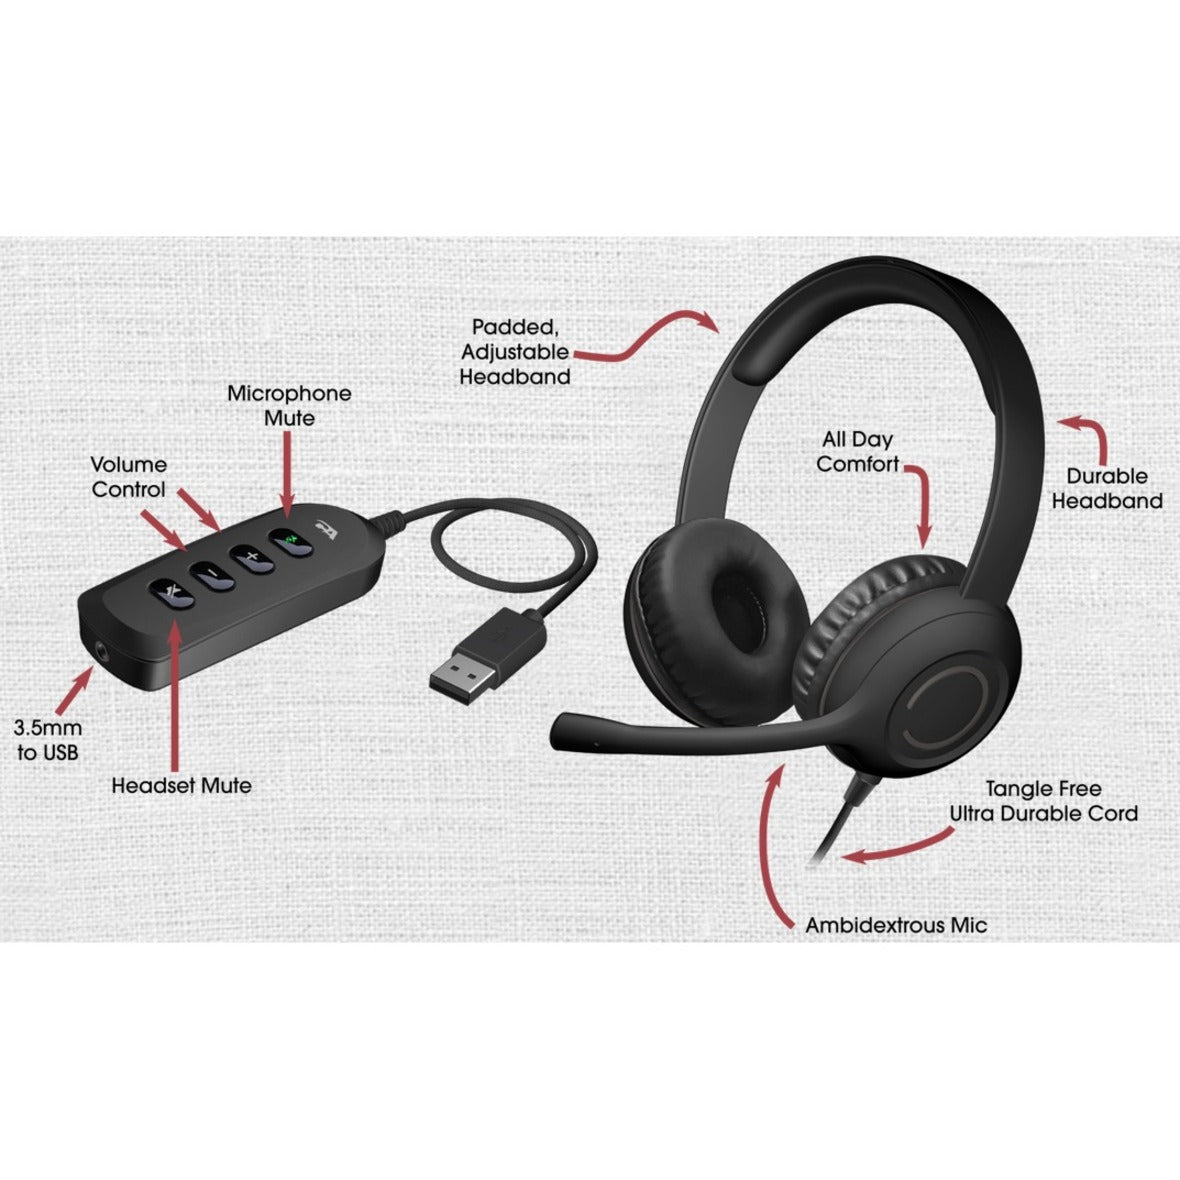 Cyber Acoustics AC-5812 Stereo Headset with USB & 3.5mm, Tangle-free Cable, LED Indicator, Mute Button, Adjustable Headband